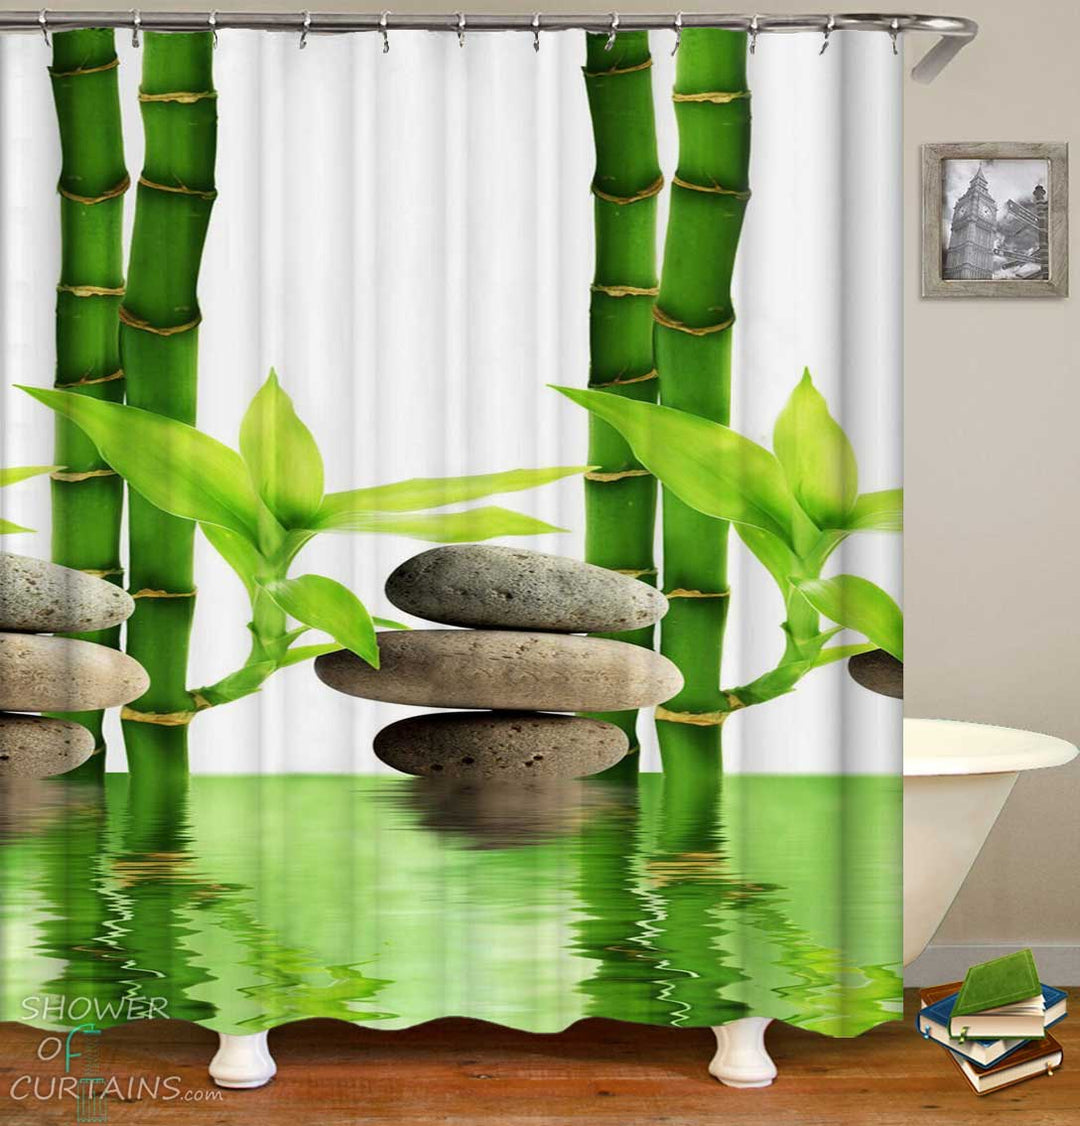 Shower Curtains with Zen Paddles and Bamboo